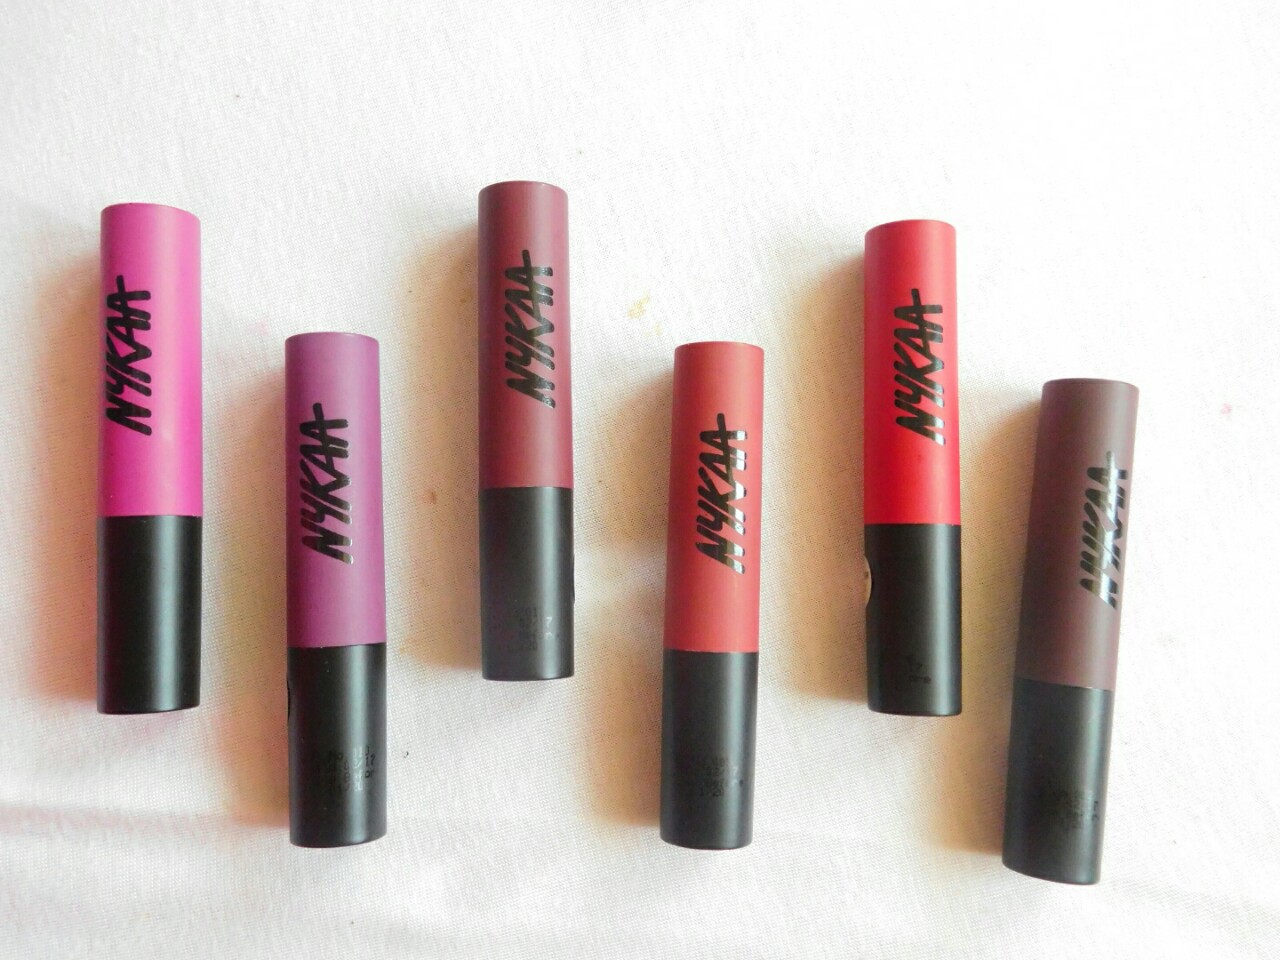 NYKAA Paintstix Lipstick Collection: Review + Swatches of 